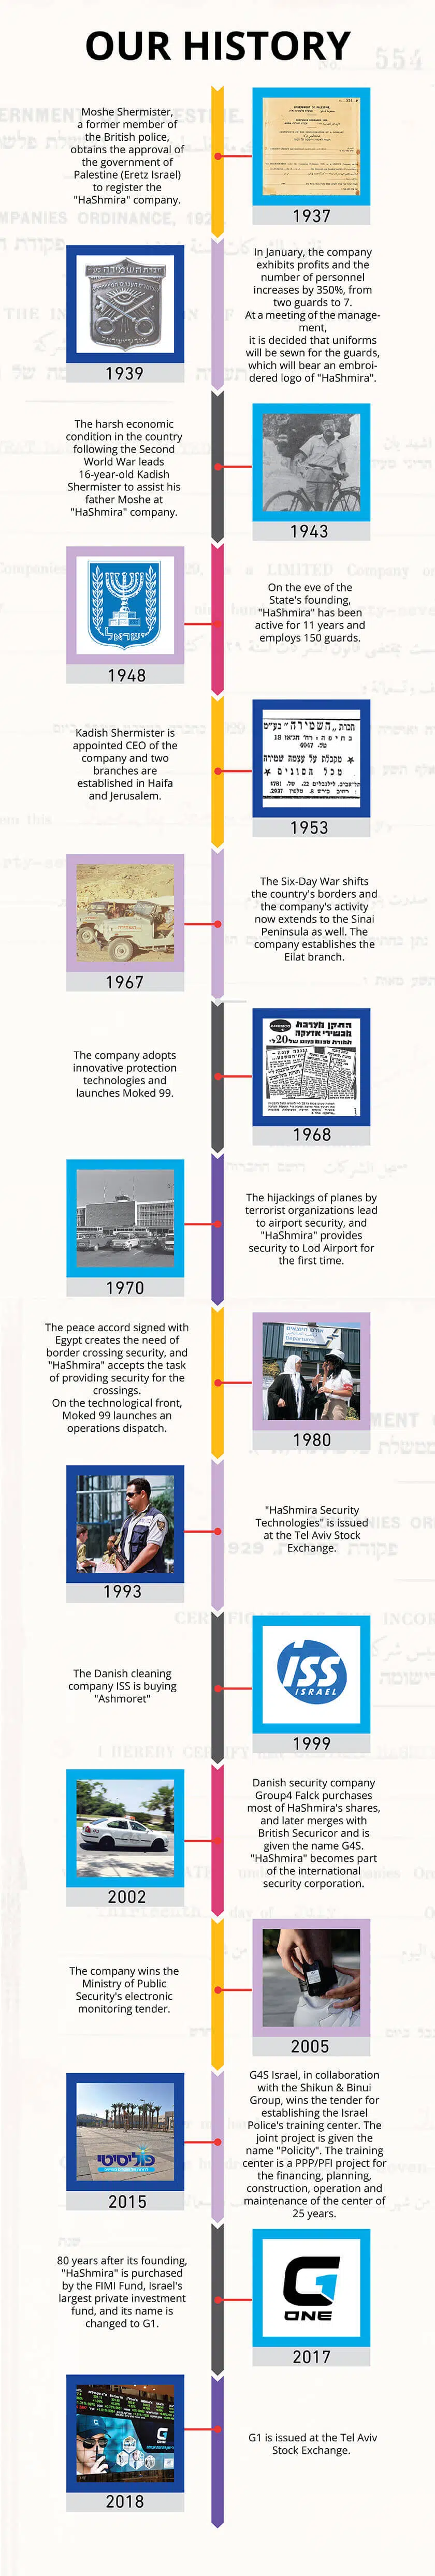 G1 - the history since 1931 till today